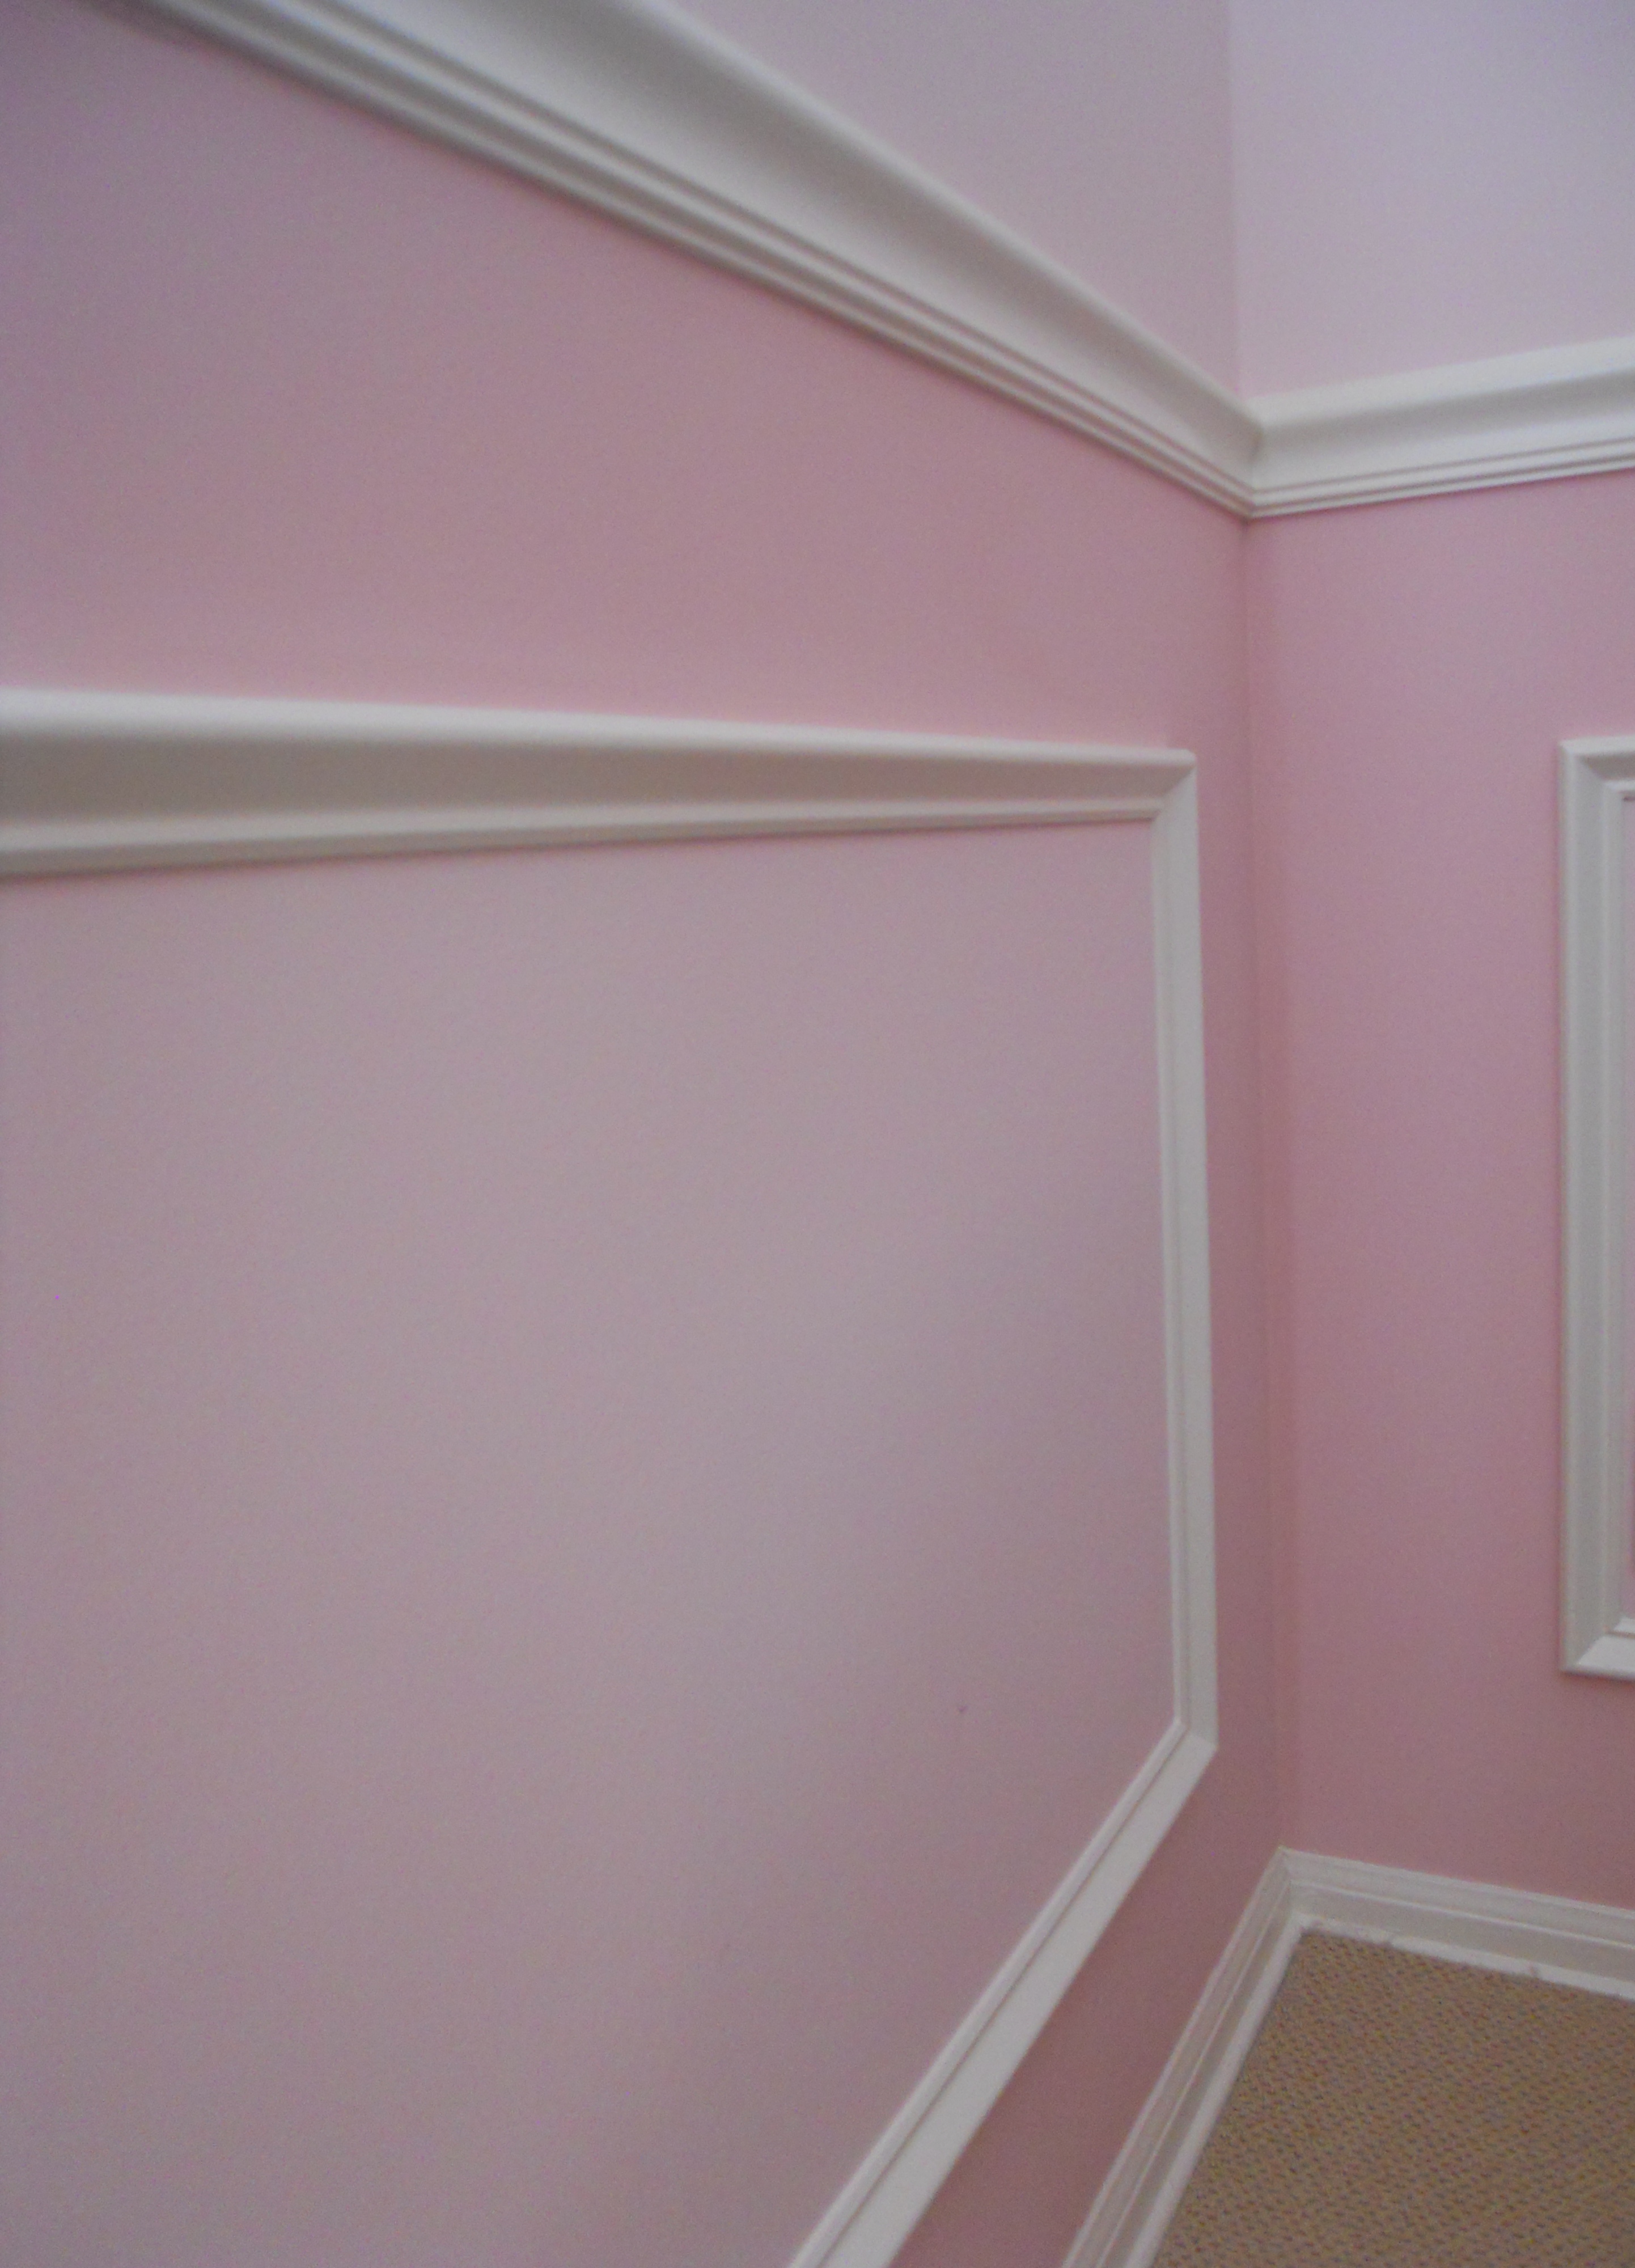 We Added Even More Interest By Painting The Raised - Pop Moulding On Wall - HD Wallpaper 